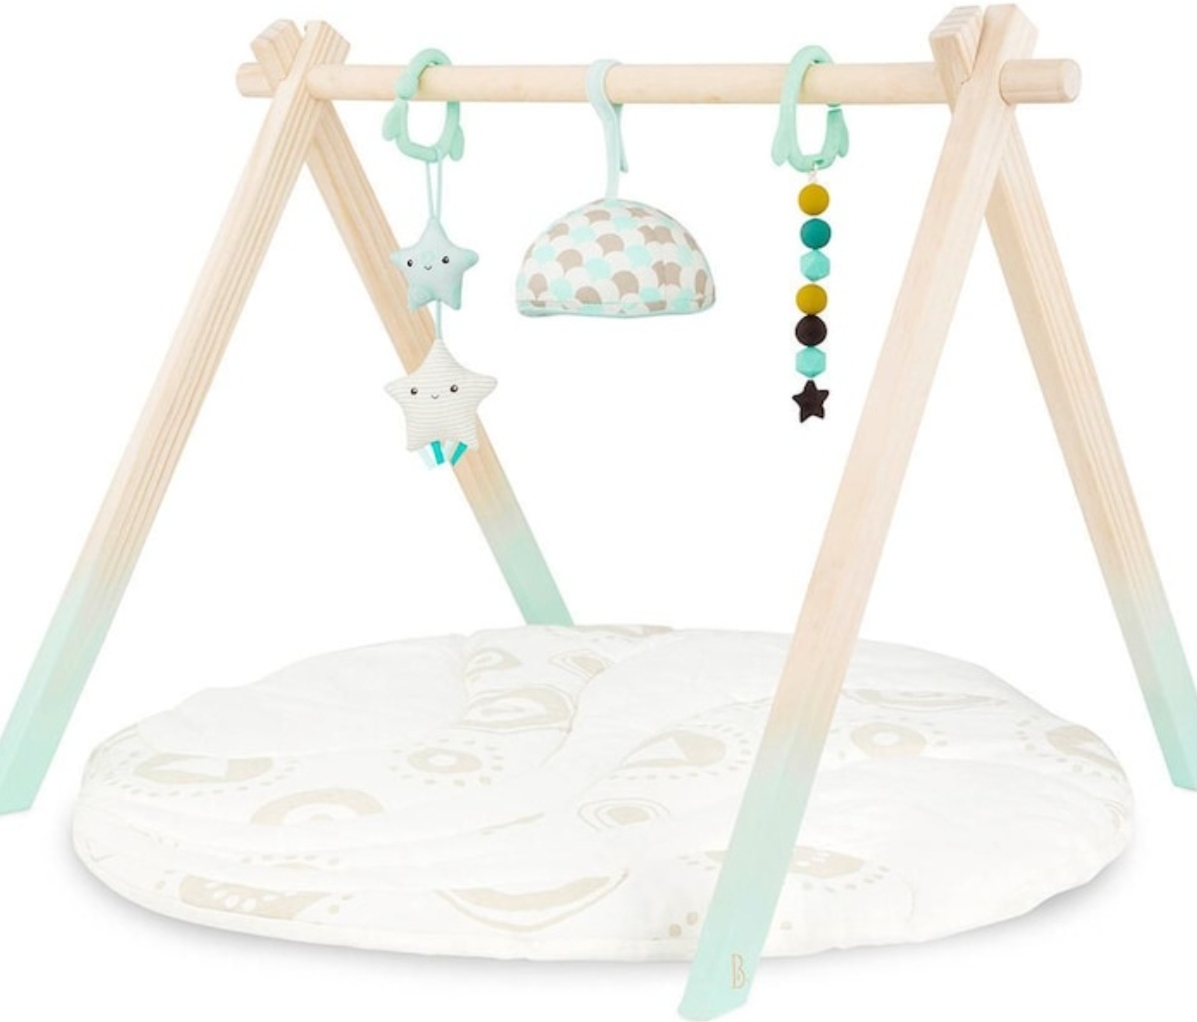 Baby Play Gym $59